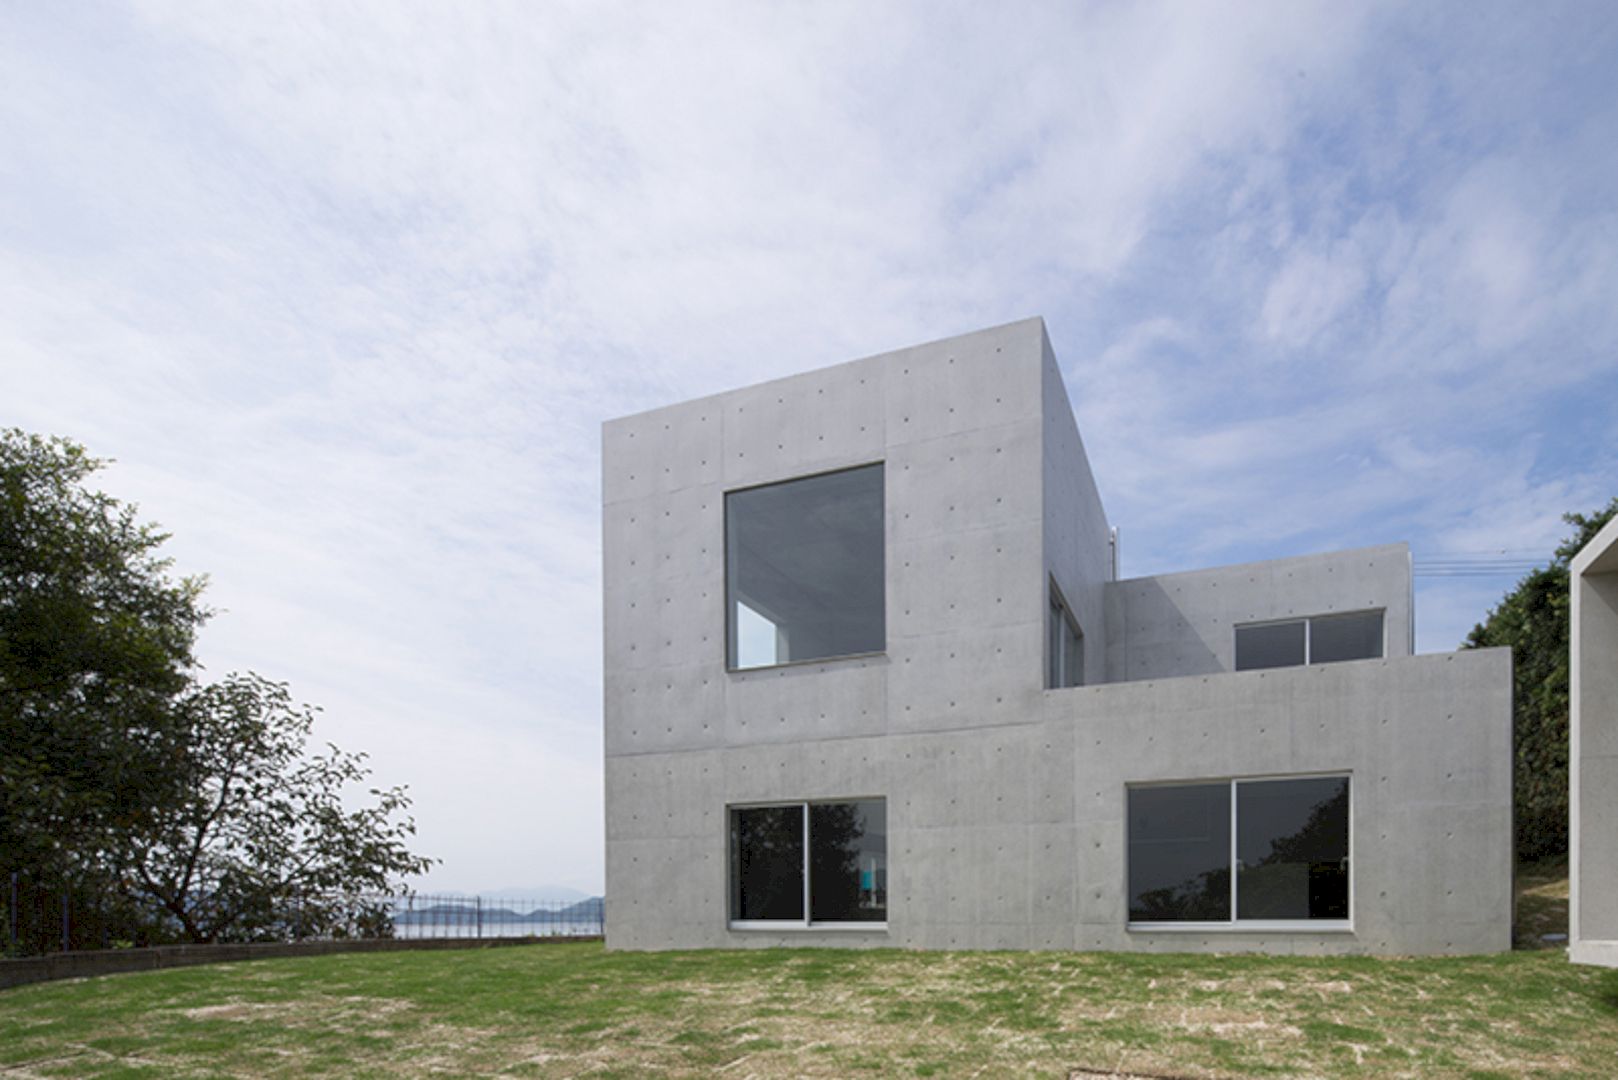 House in Akitsu: A Concrete House with A Very Special Concrete Spiral Staircase